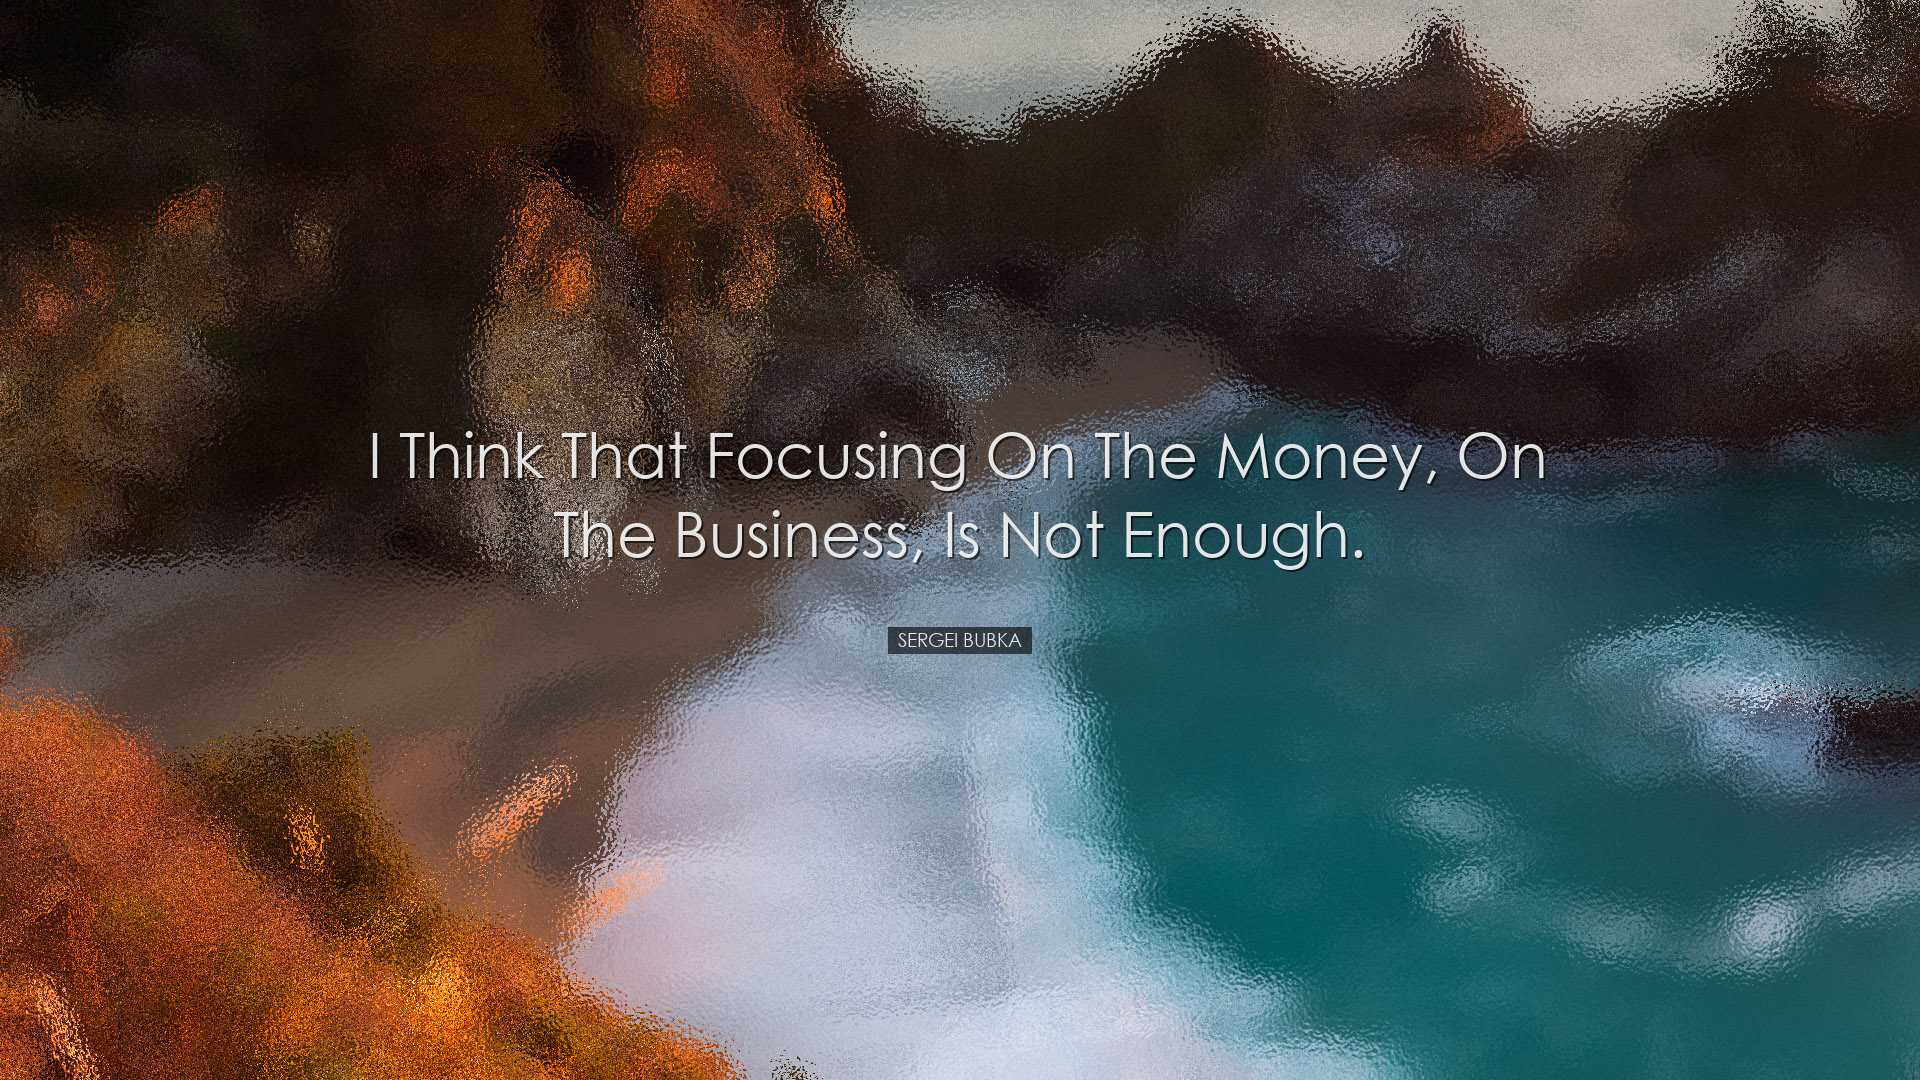 I think that focusing on the money, on the business, is not enough